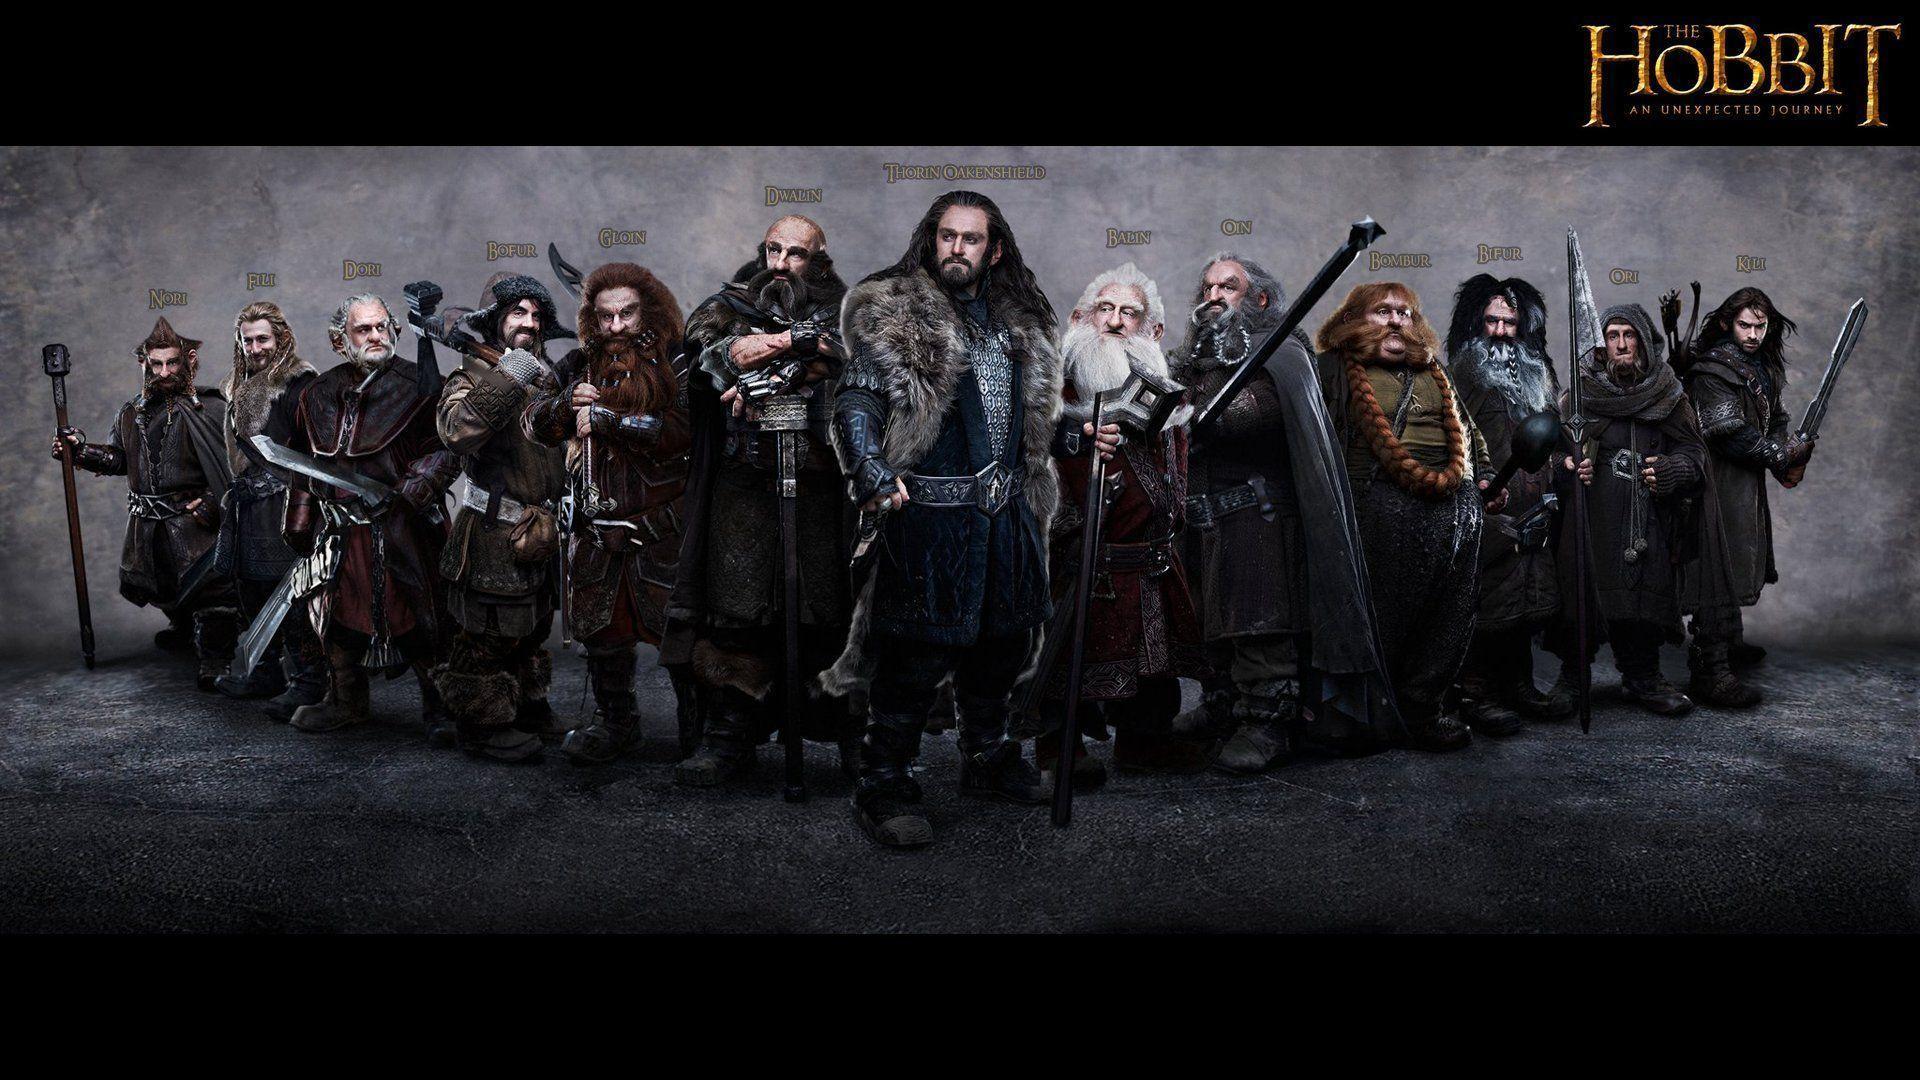 Movie The Hobbit: An Unexpected Journey Wallpaper 1920x1080 px